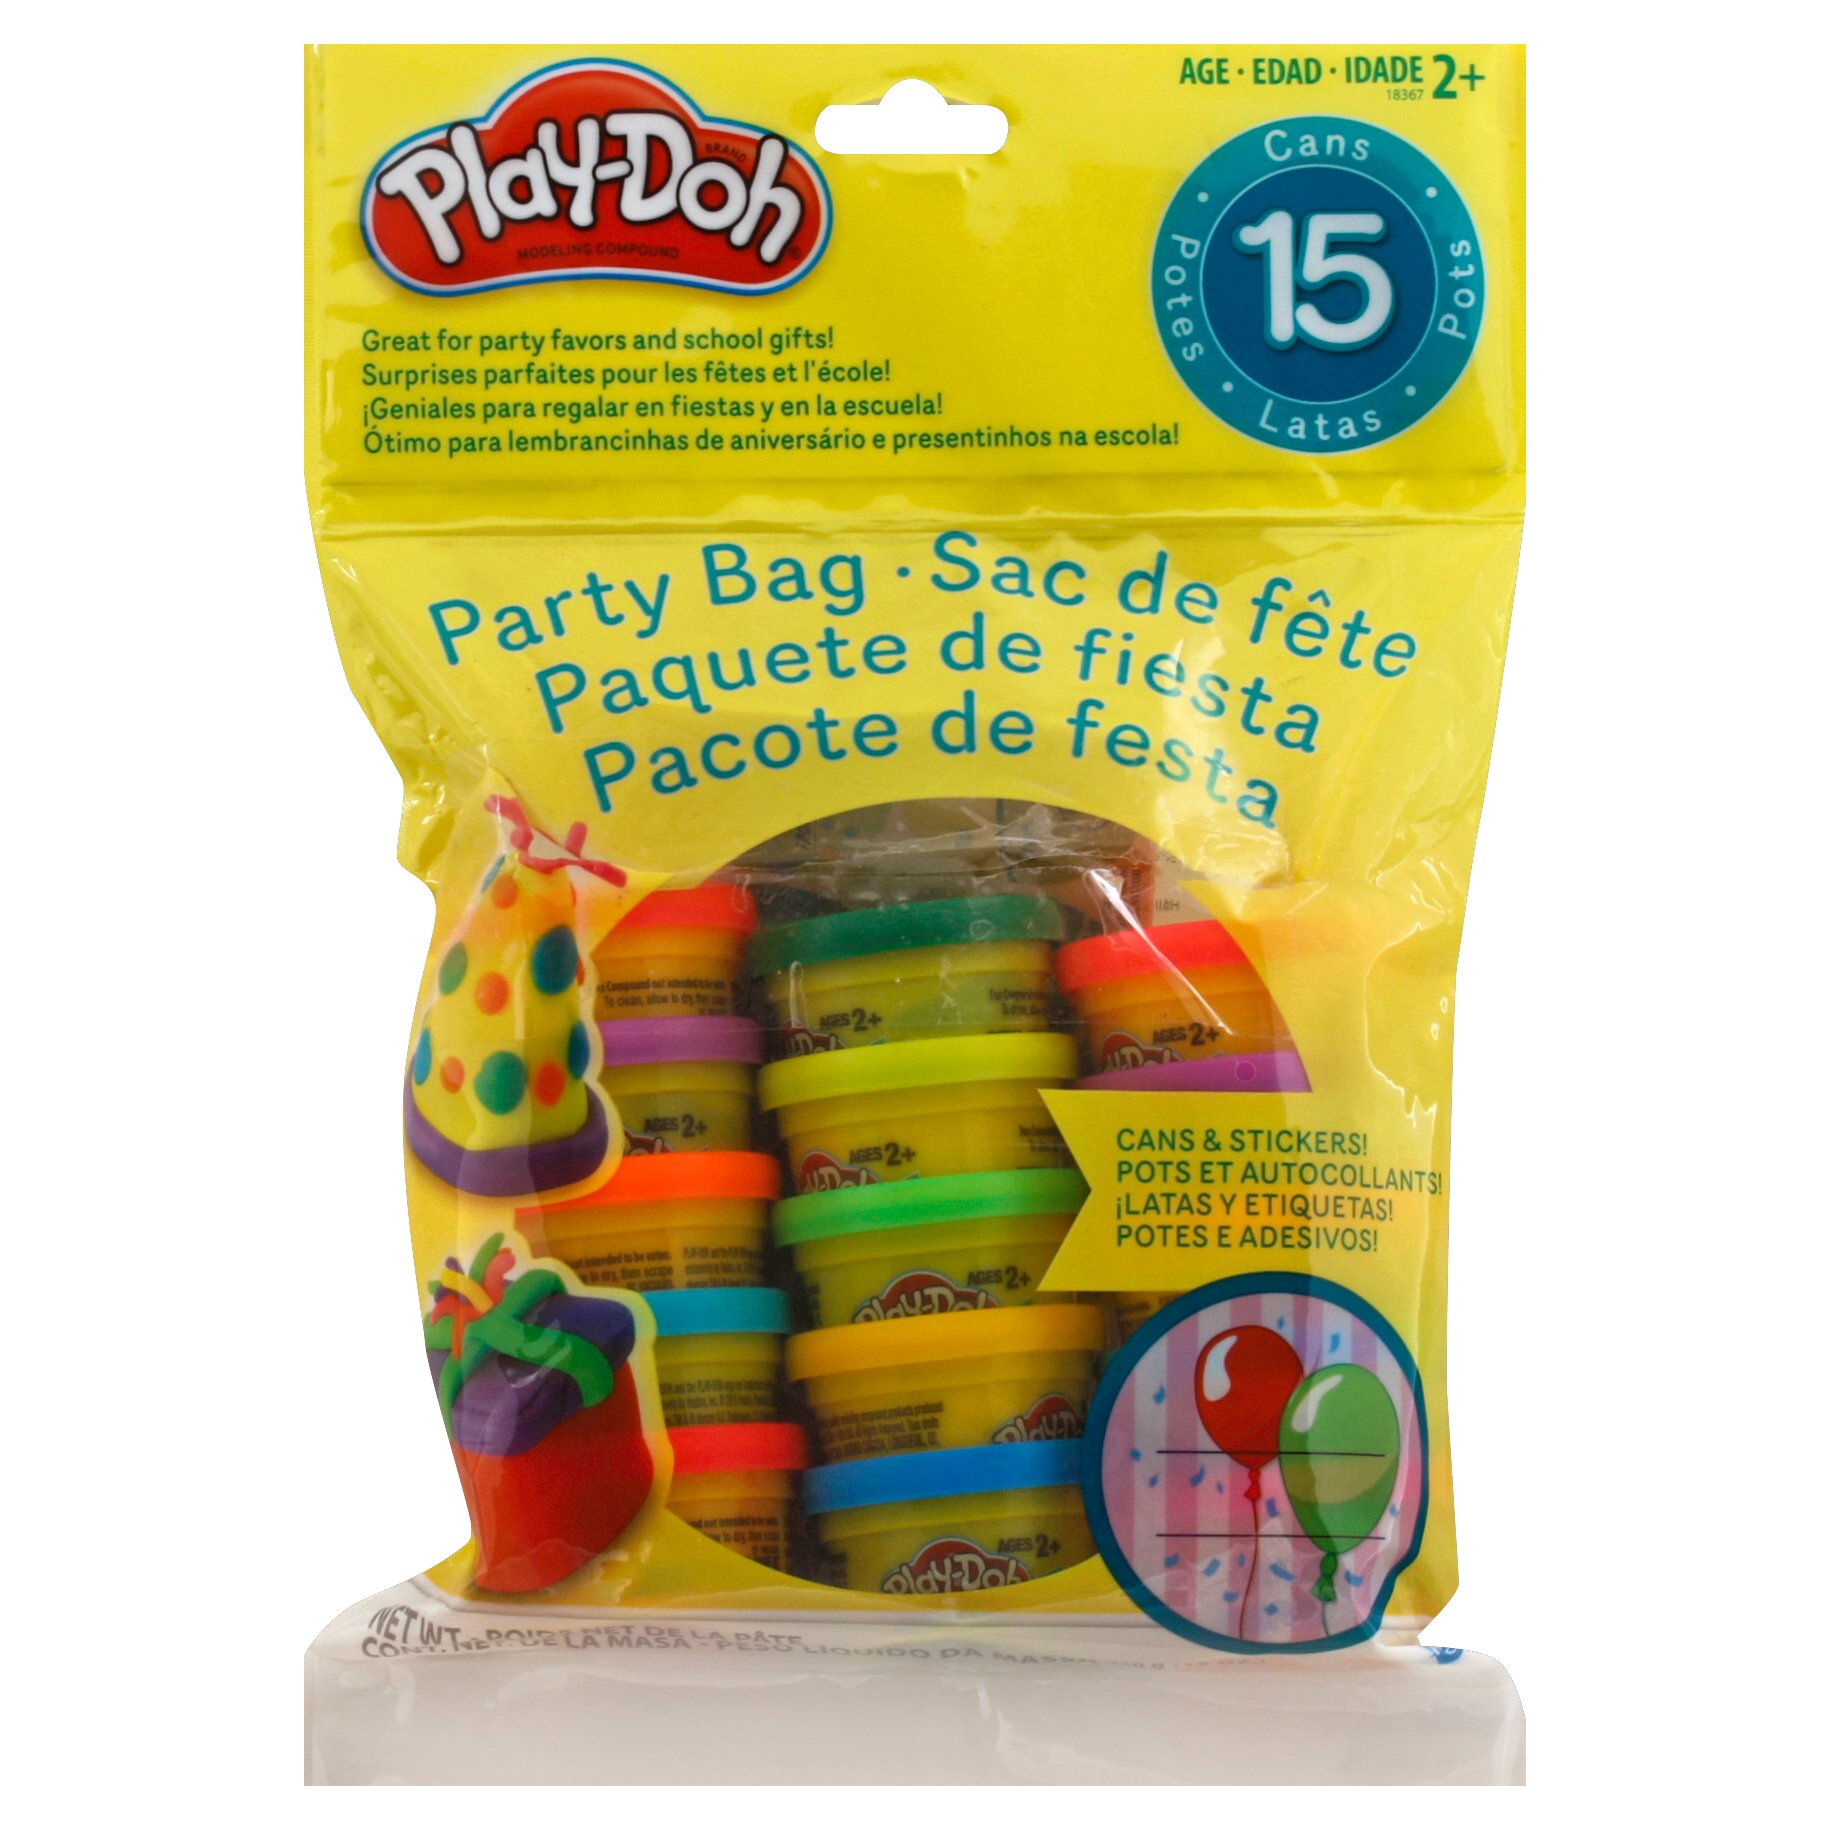 PlayDoh Mini PlayDoh Cans Party Bag Pack of 10 280g Each Online KSA, Buy  Art & Creativity Toys for (2-9Years) at  - 3ea59aef5ff76